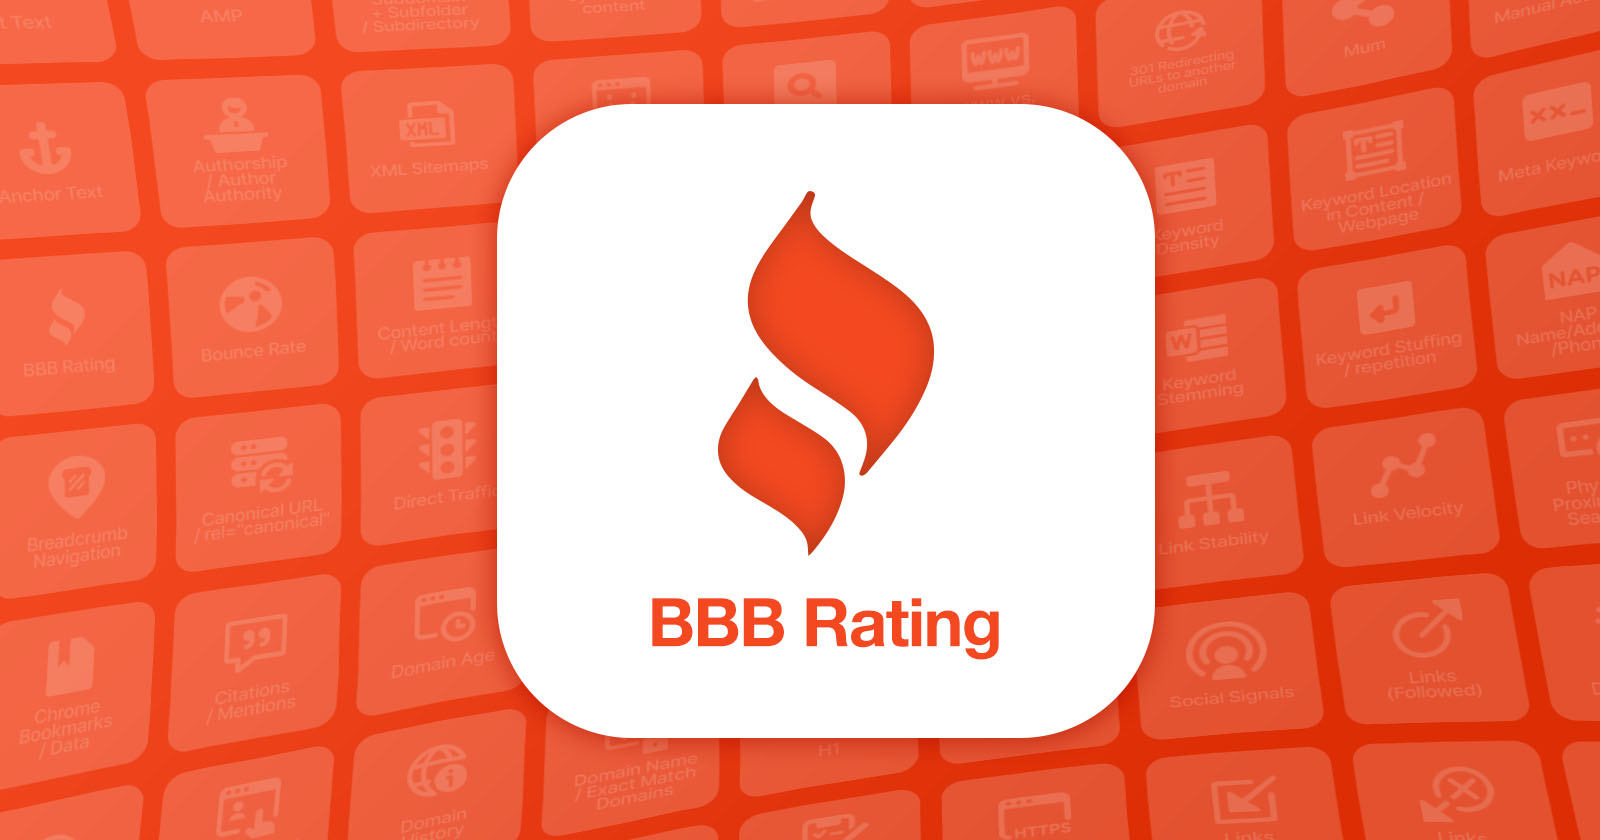 BBB Rating: Is It A Google Ranking Factor?